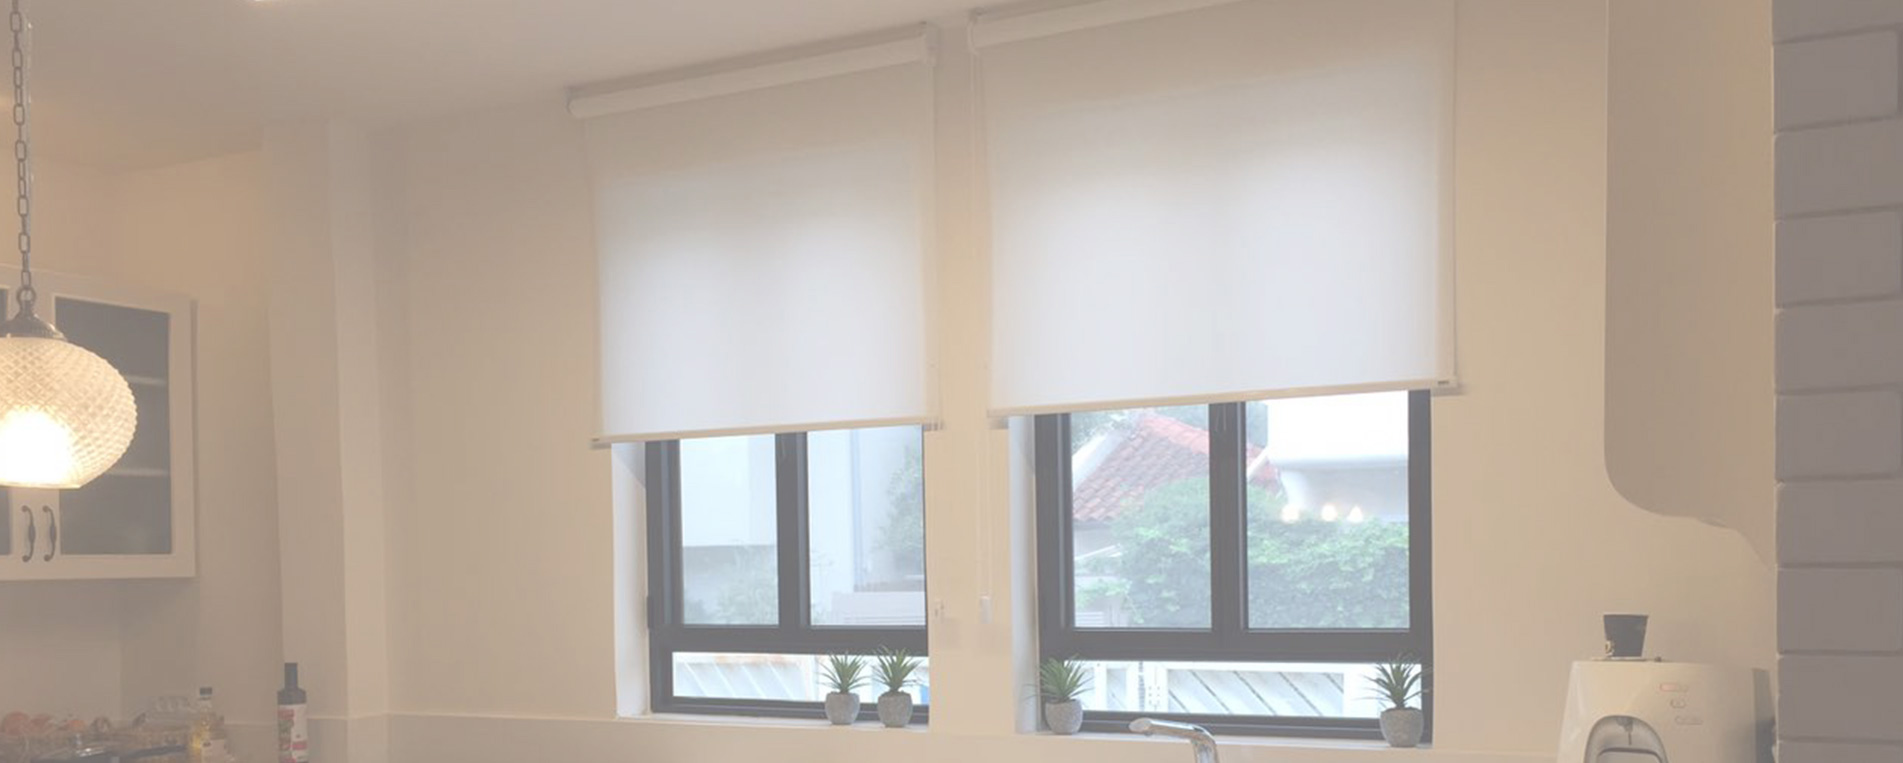 Common Questions Regarding Window Blinds and Shades